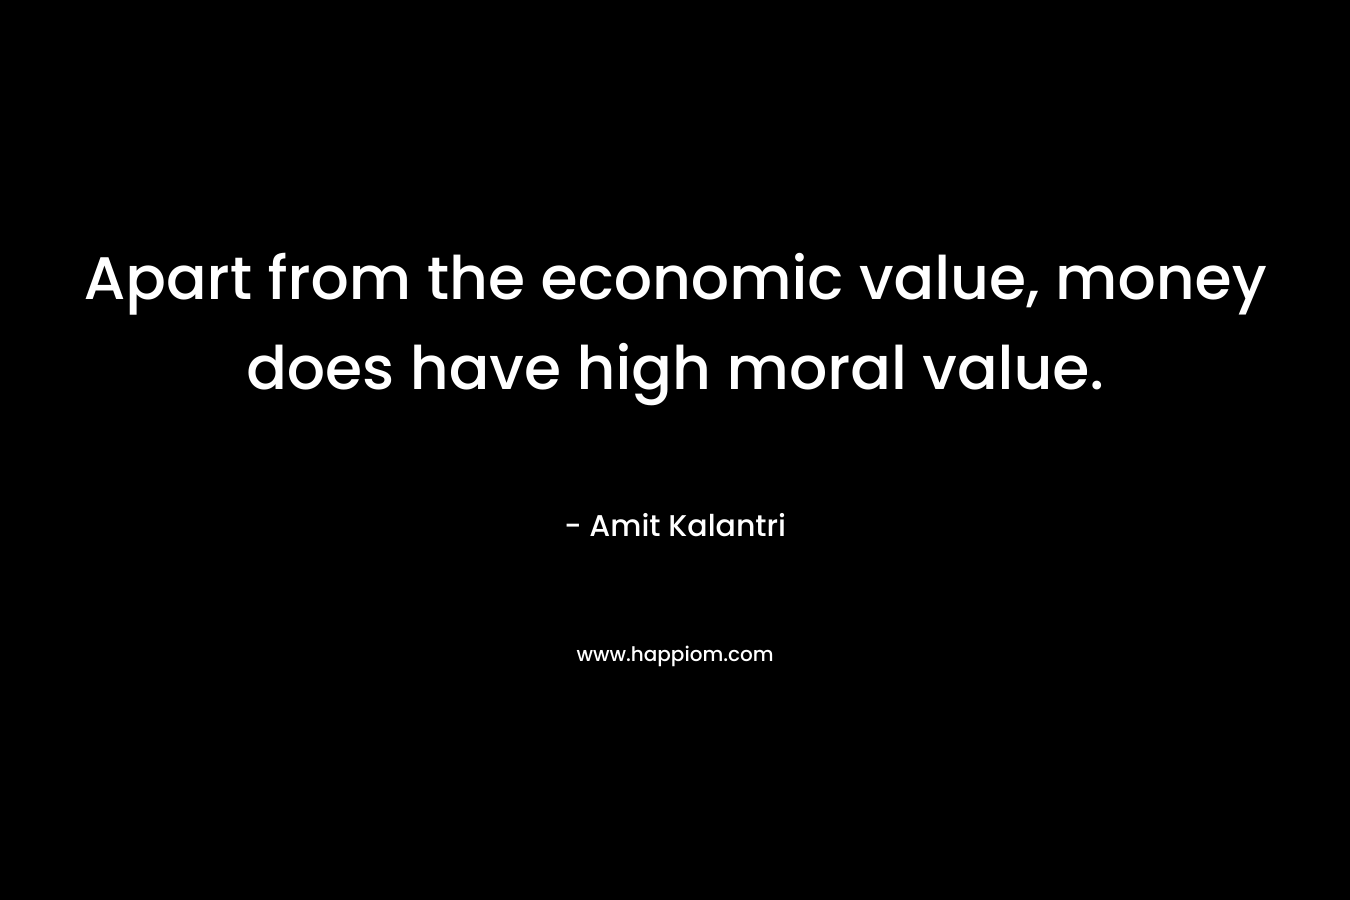 Apart from the economic value, money does have high moral value.